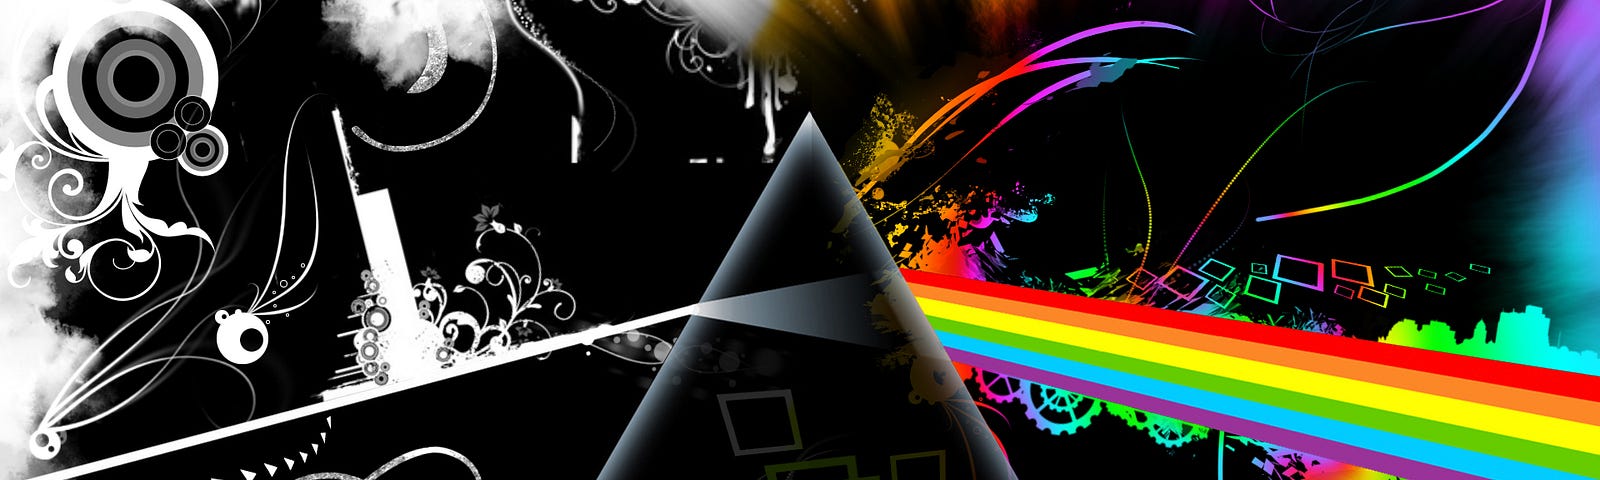 Graphic take of “Dark Side of the Moon” cover: dark triangle, half shining rainbow prism the other white, cosmic doodles.